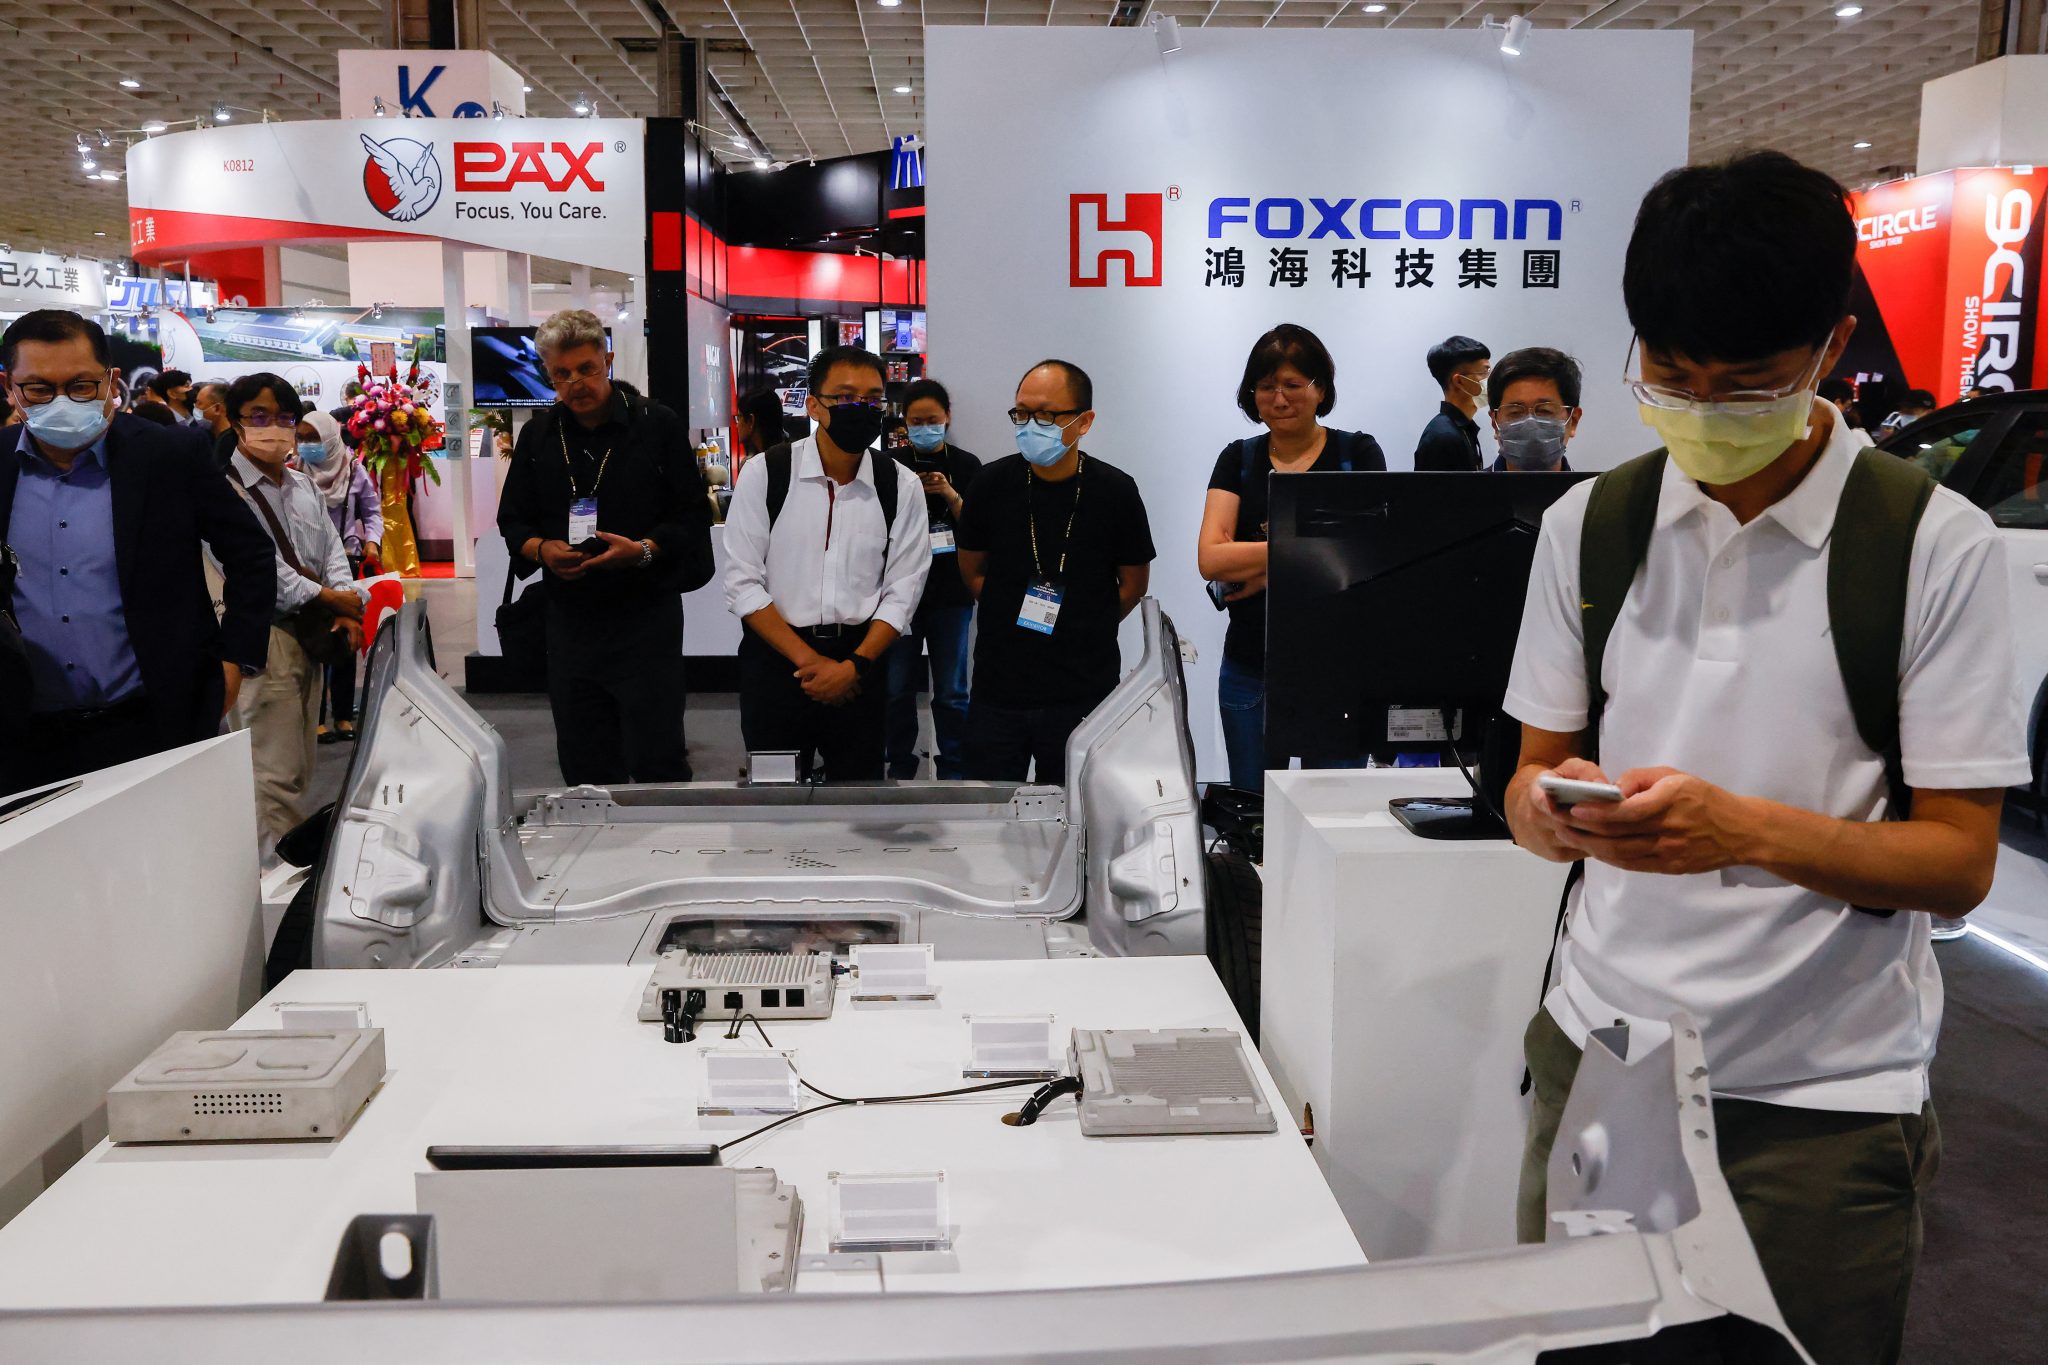 People gather at the Foxconn booth at 2035 E-Mobility Taiwan in Taipei, Taiwan, 13 April 2023 (Photo: REUTERS/Ann Wang)